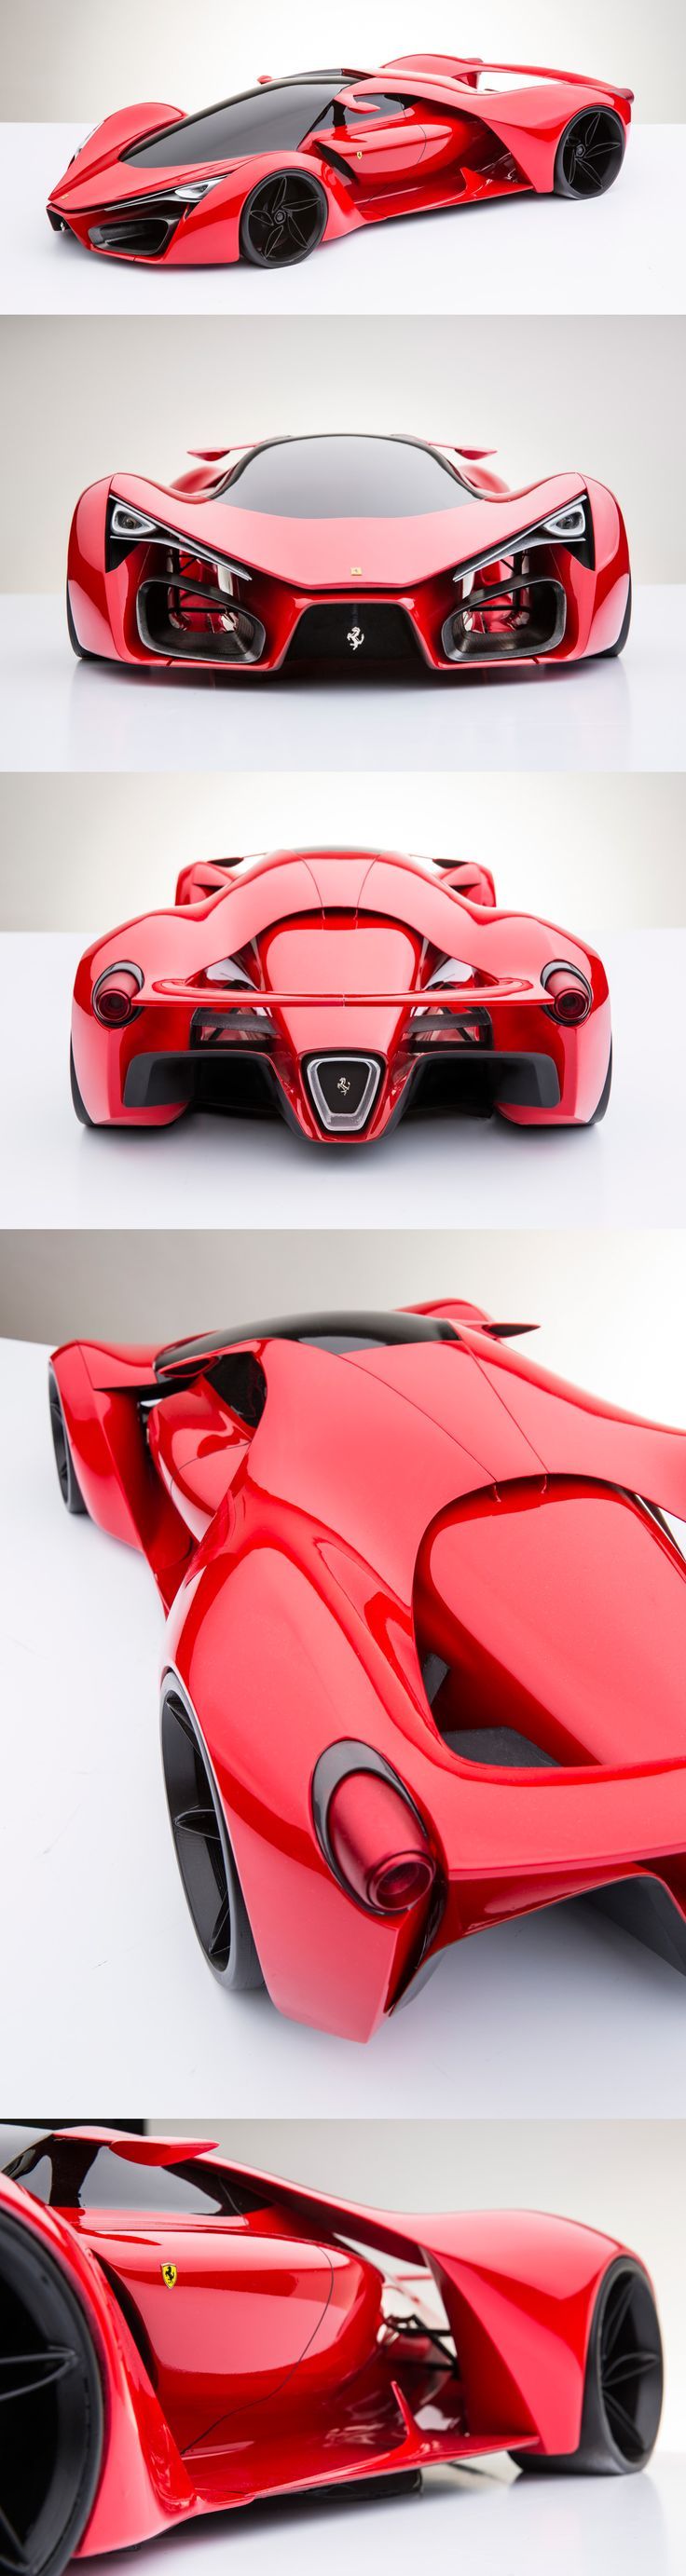 Ferrari F80 Ferrari Concept - Hot or Not? Click to sign up for #TinderForCars